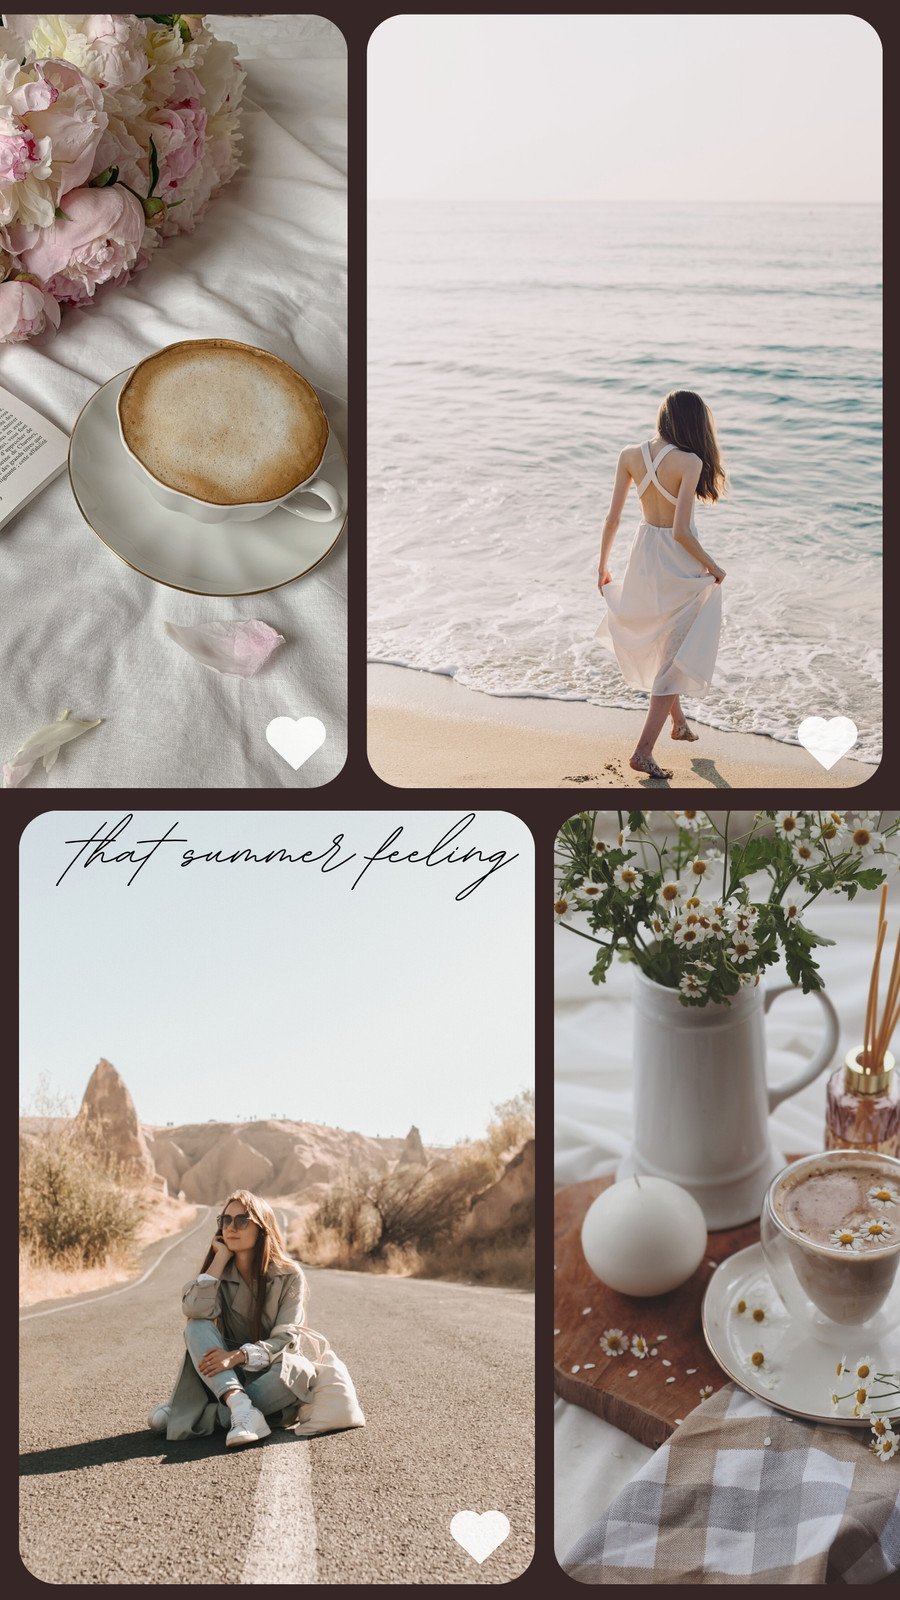 Free and customizable Instagram story templates